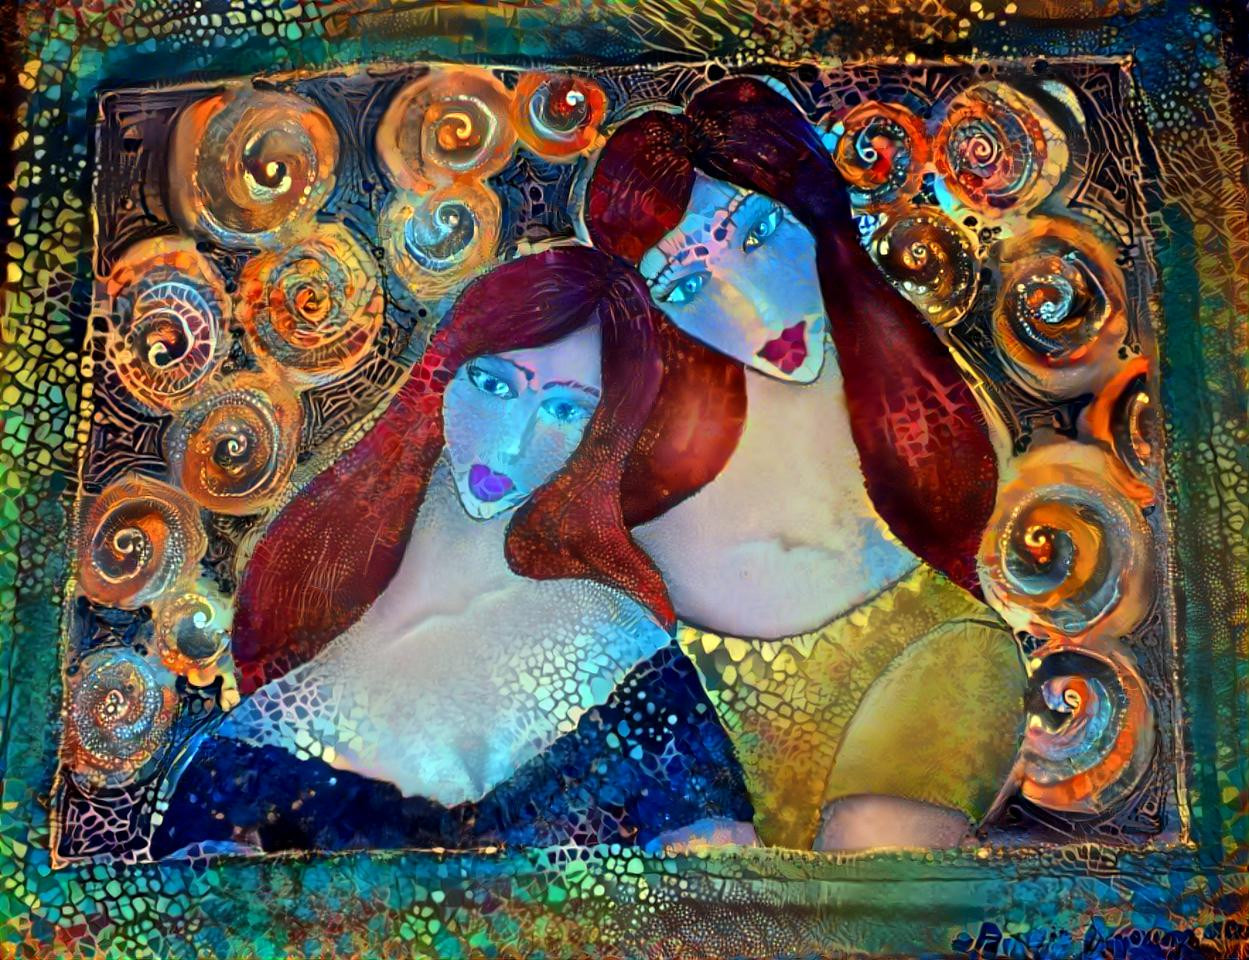 Fabricpainting of a Mother and Daughter.